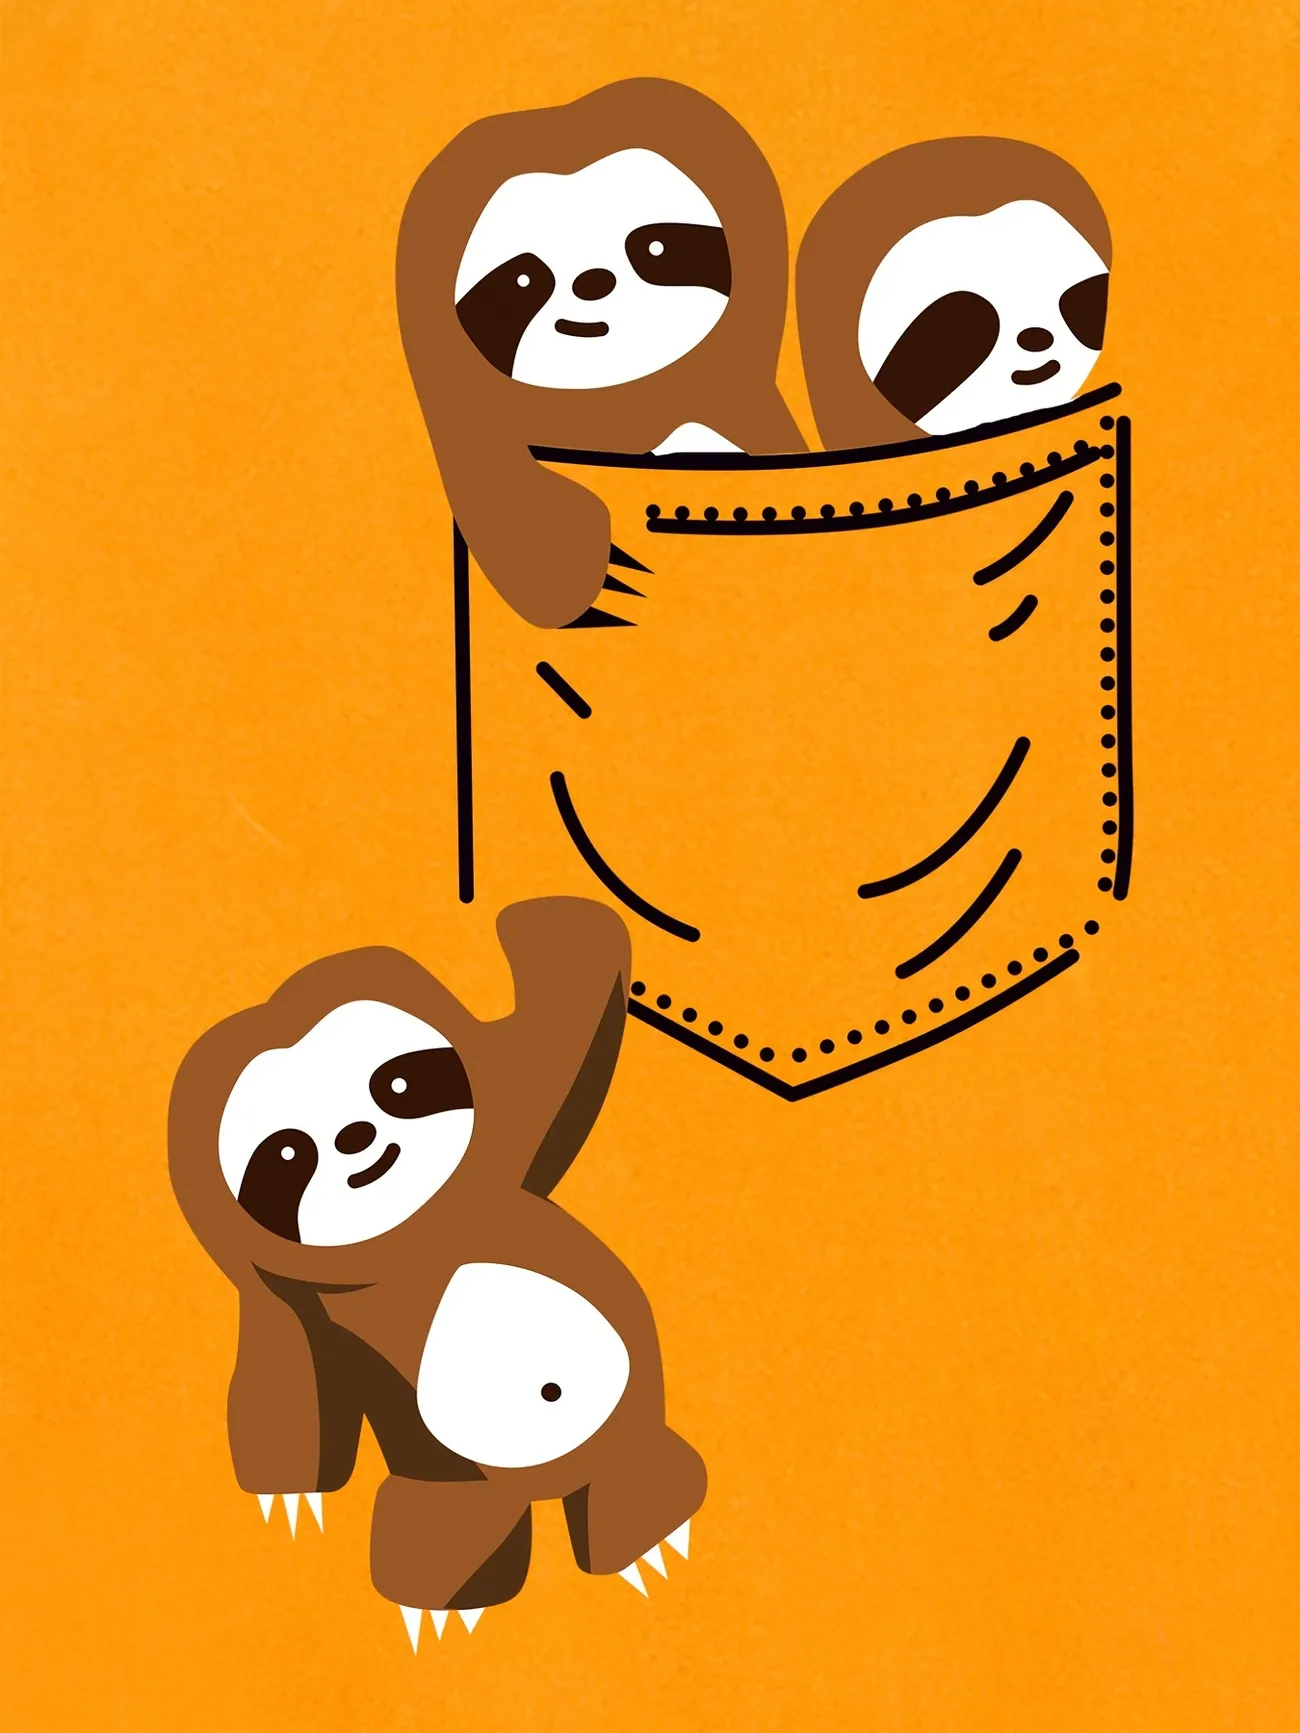 A baby sloth hanging out of a pocket on an orange shirt - Sloth